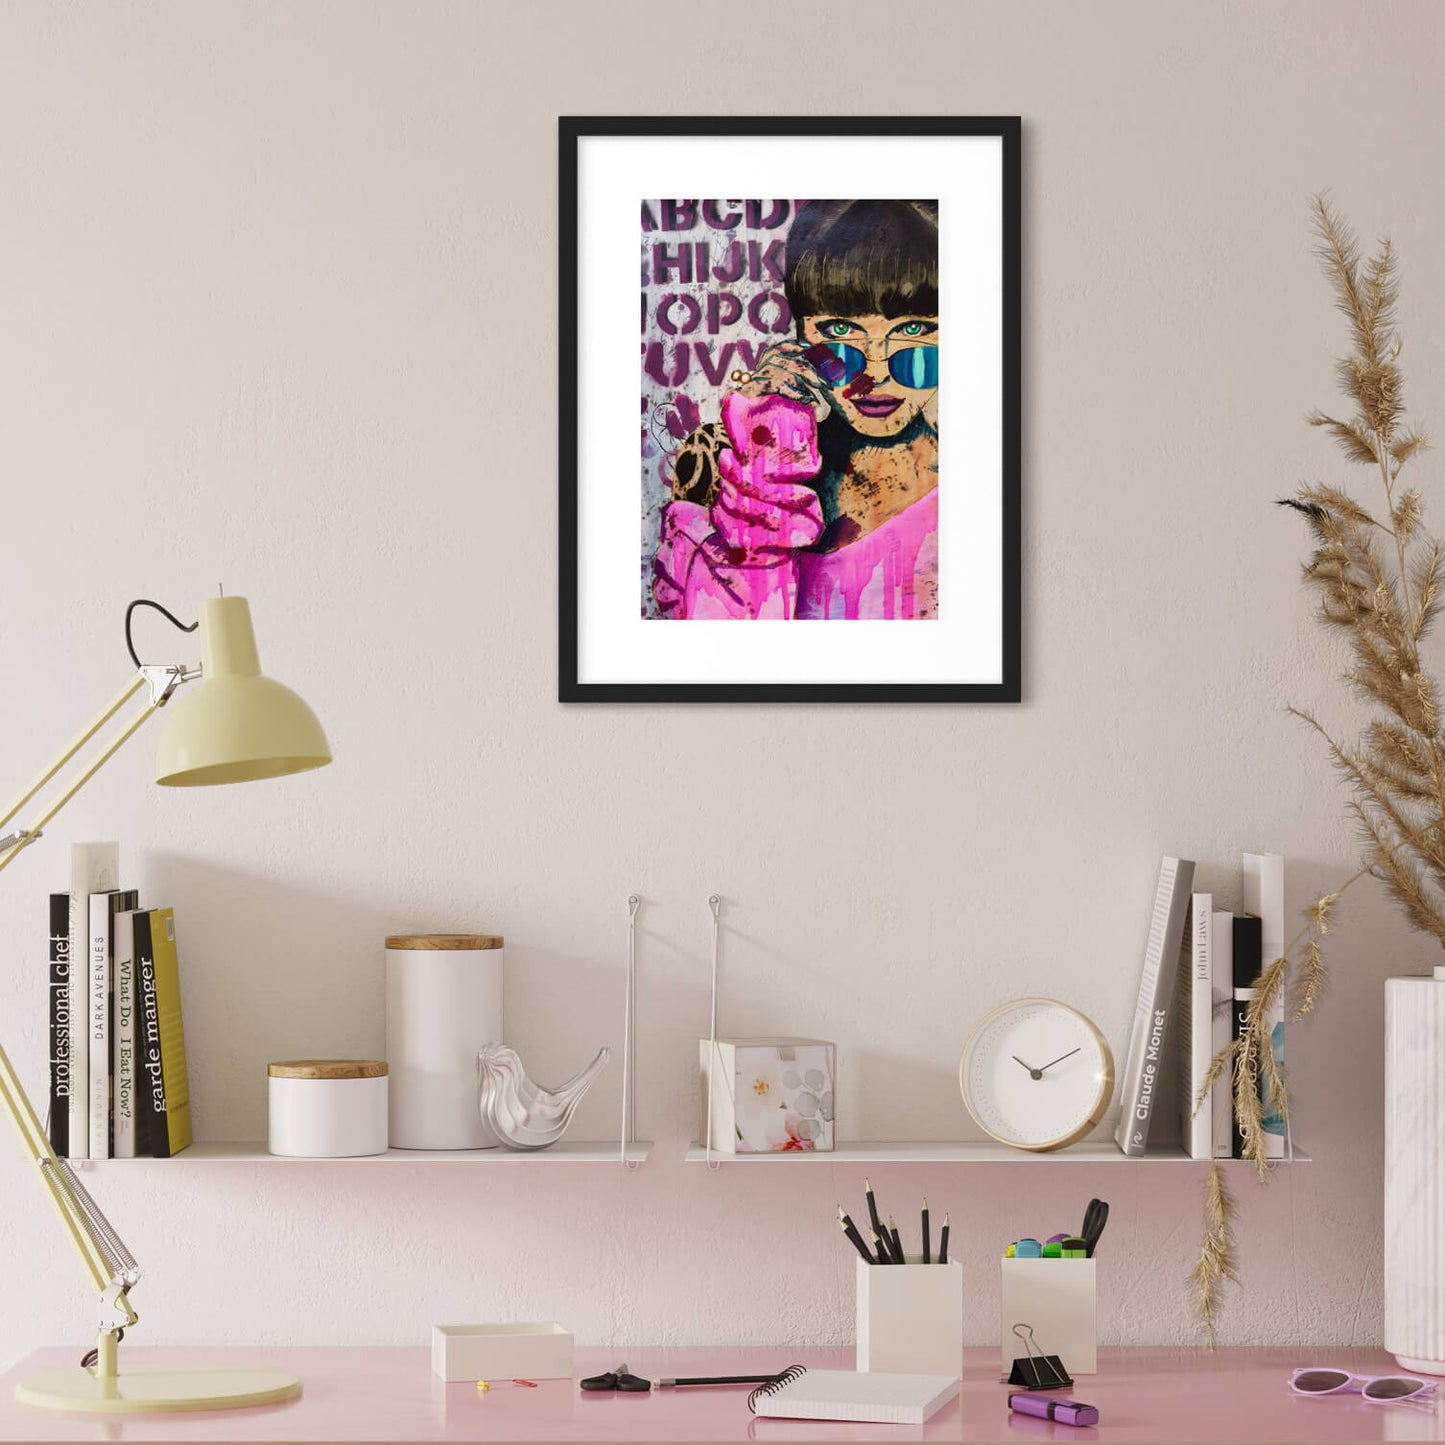 Colourful art, colourful paintings maximalist decor, woman wearing hot pink sweater and sunglasses wall art print 